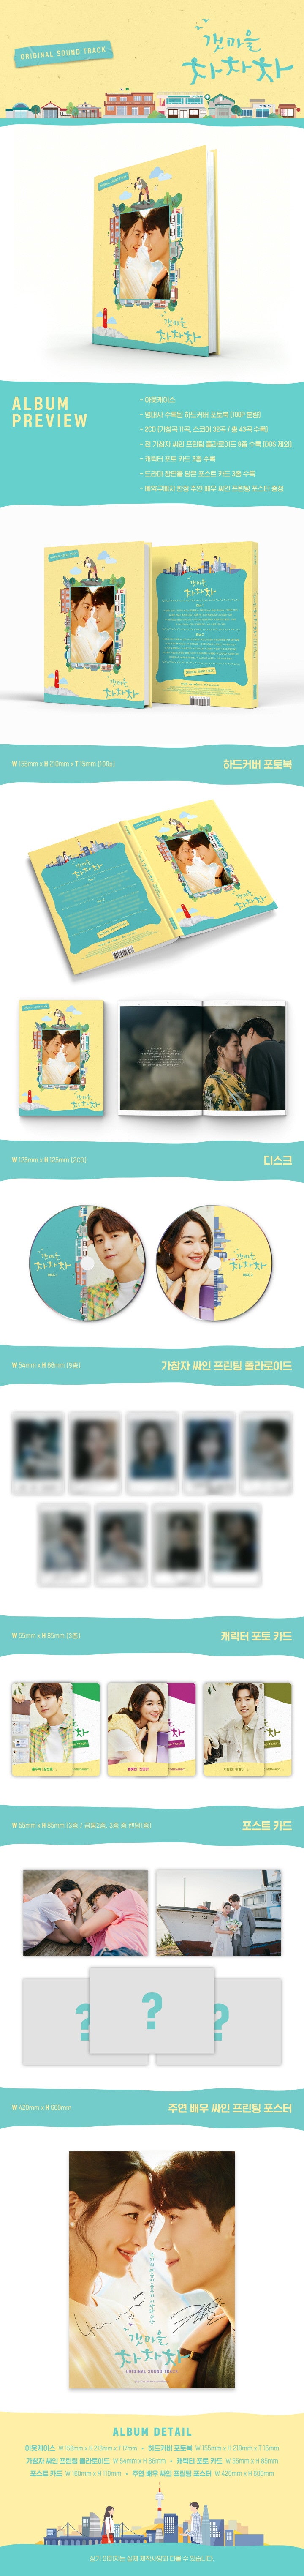 Hometown Cha-Cha-Cha OST Album 2CD  Witness the heartwarming human story of the people of Gongjin in the seaside village <Hometown Cha-Cha-Cha> Writer's Edition Uncut Script Collection.   The vast sea, the blue sky, the two main actors Shin Min-ah and Kim Seon-ho, are full of charms that you can't help but love. Also, the people of Gongjin, with their own heartbreaking narratives, captured the hearts of global drama fans.  Hye-jin and Doo-sik are caught up in every move by the people of Gongjin without the word 'secret love.' However, there is a token of love that only they possess. A love letter! What kind of story would be contained if Hyejin and Dooshik exchanged a 'love letter' that could only have more sincerity? Hyejin and Dooshik's love letters, which will keep the afterglow of the drama undying, are included in this book set.   Product Size(mm) 155 x 210 x 15  Component Hometown Cha-Cha-Cha OST Album 2CD  Country Of Origin Republic Of Korea